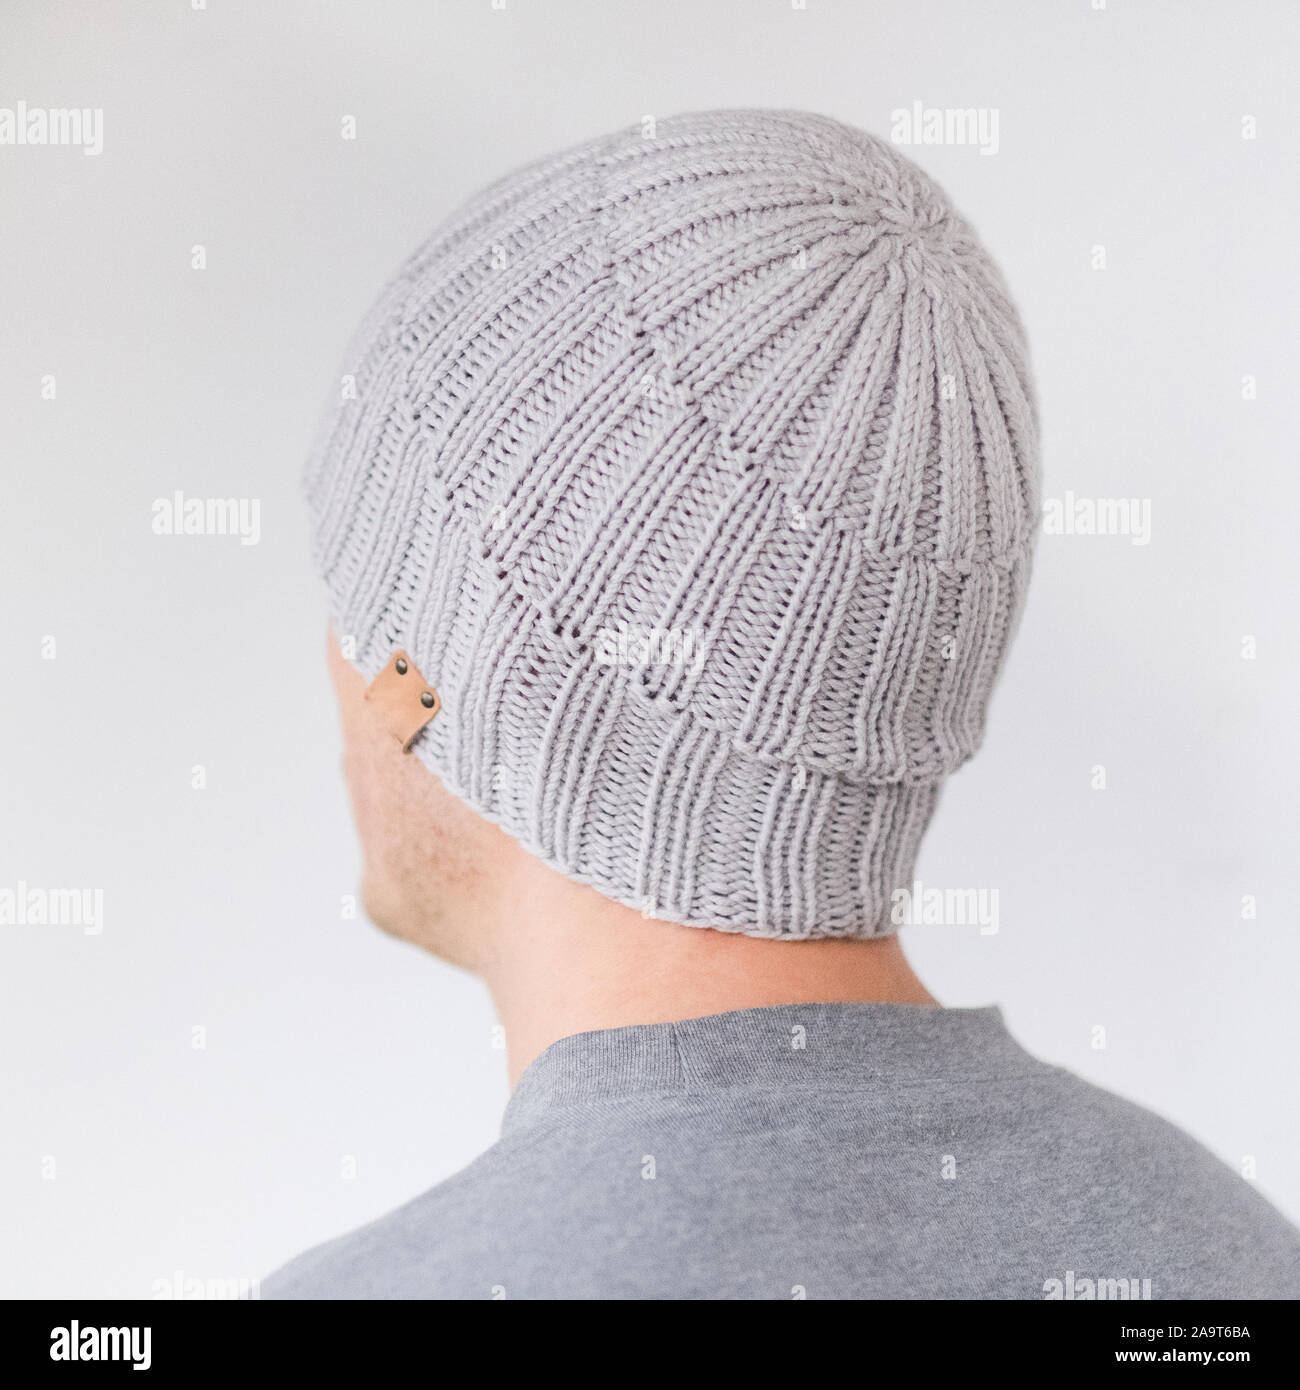 Cool man in winter fashion. Wearing scarf and knit hat Stock Photo